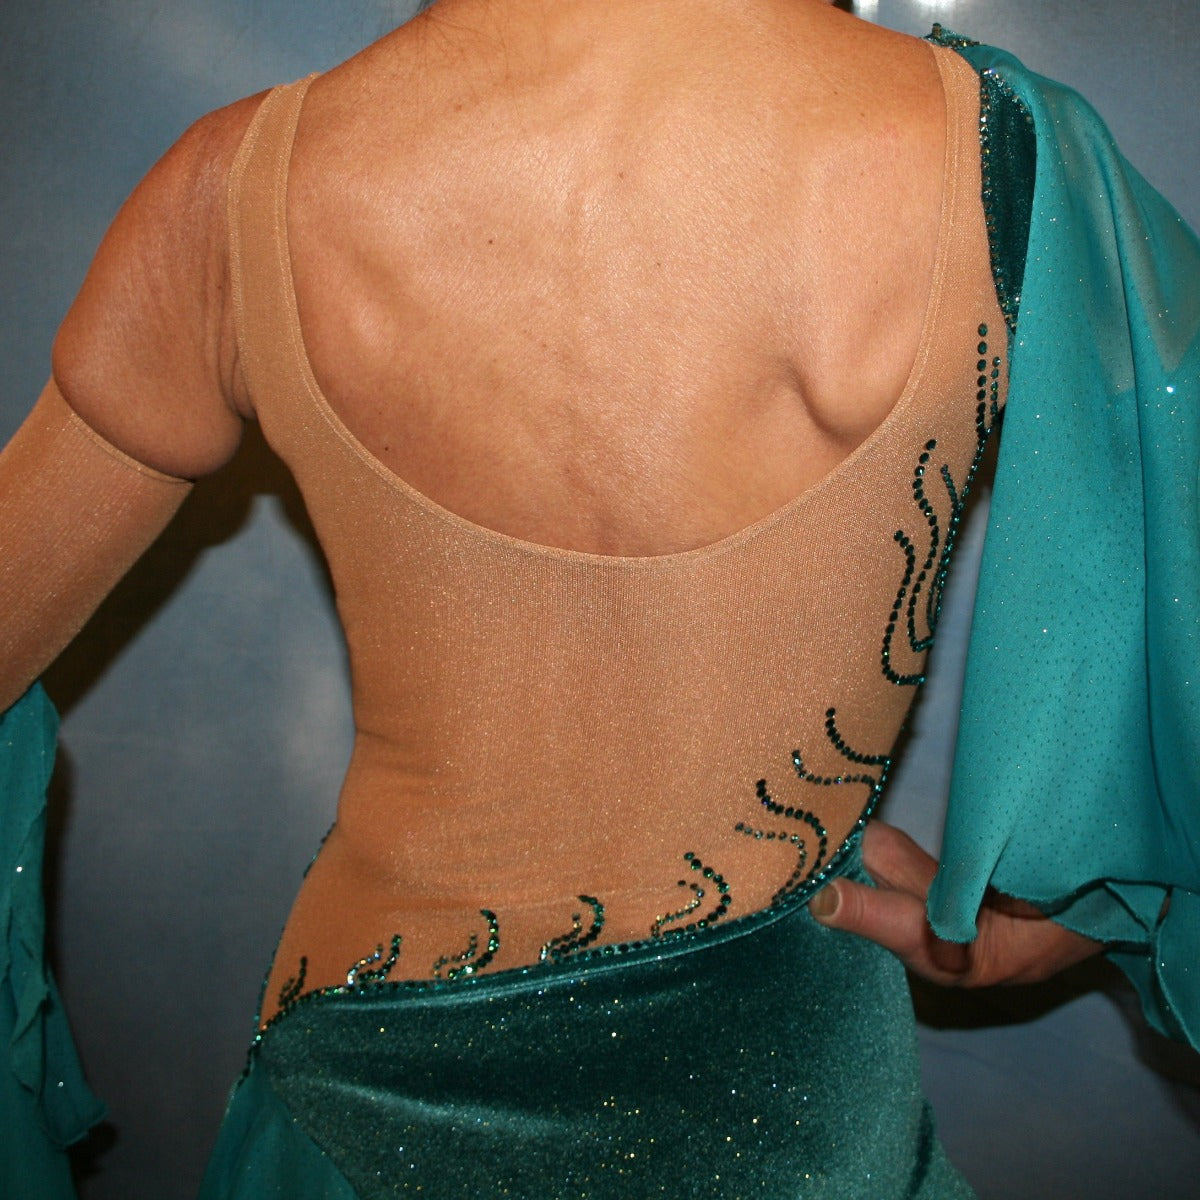 Crystal's Creations close up back view of Teal Latin/rhythm dress was created on a nude illusion base with luxurious teal glitter stretch velvet fabric along with flounces of teal glitter chiffon, embellished with blue zircon & blue zircon Ab Swarovski stonework plus hand beaded detailing